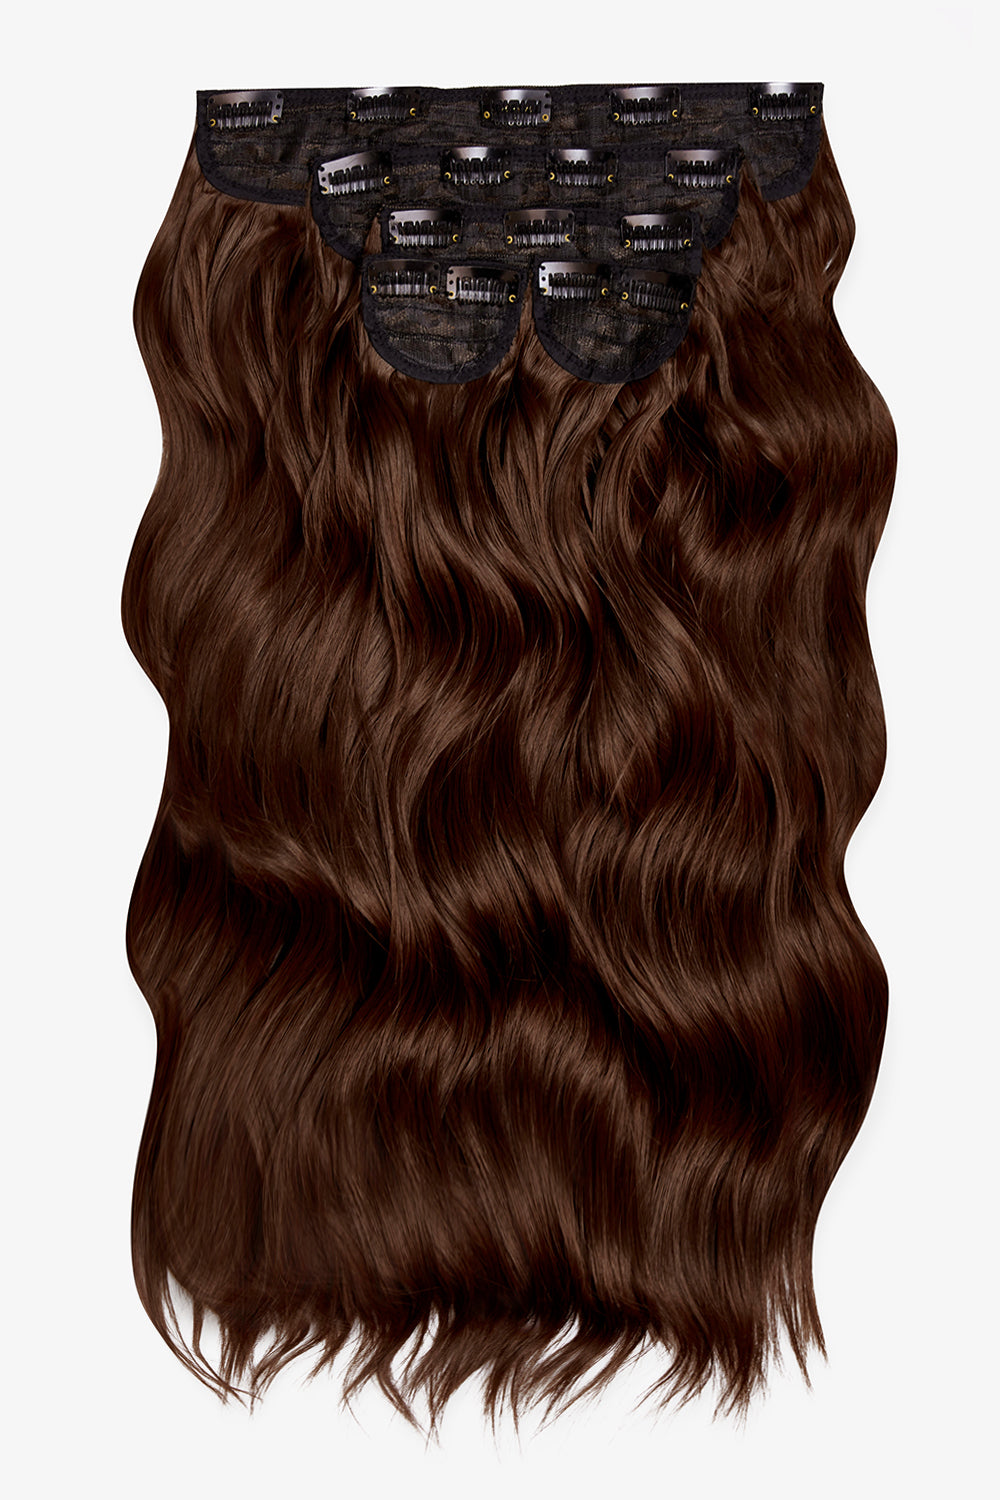 Super Thick 22" 5 Piece Brushed Out Wave Clip in Hair Extensions + Hair Care Bundle - Golden Brown